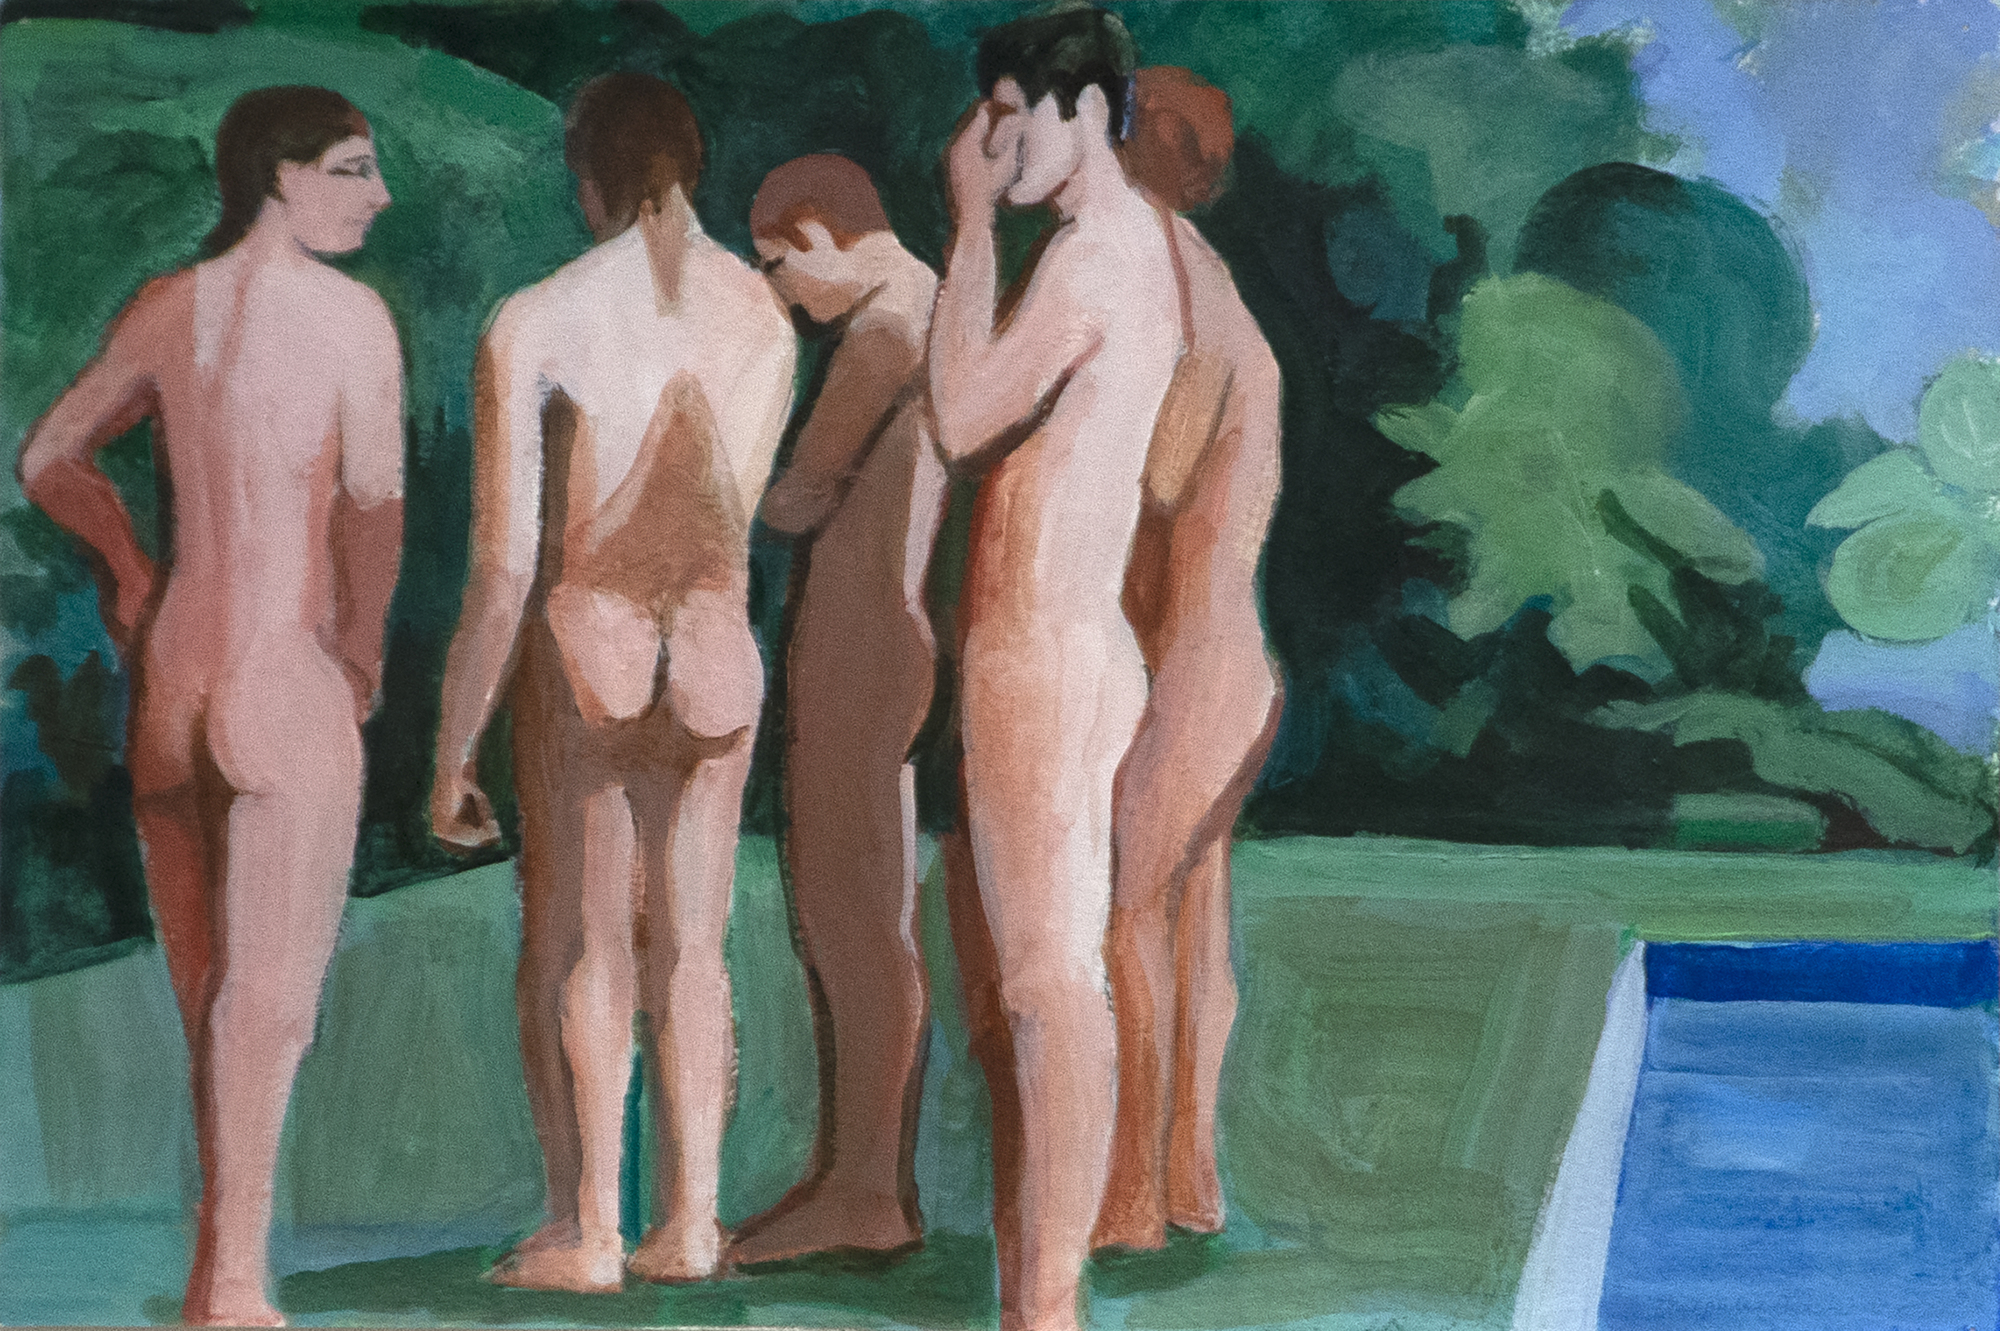 WILLIAM THEOPHILUS BROWN - Untitled (Group of Nudes by the Pool) - acrylic on paper - 10 x 15 in.